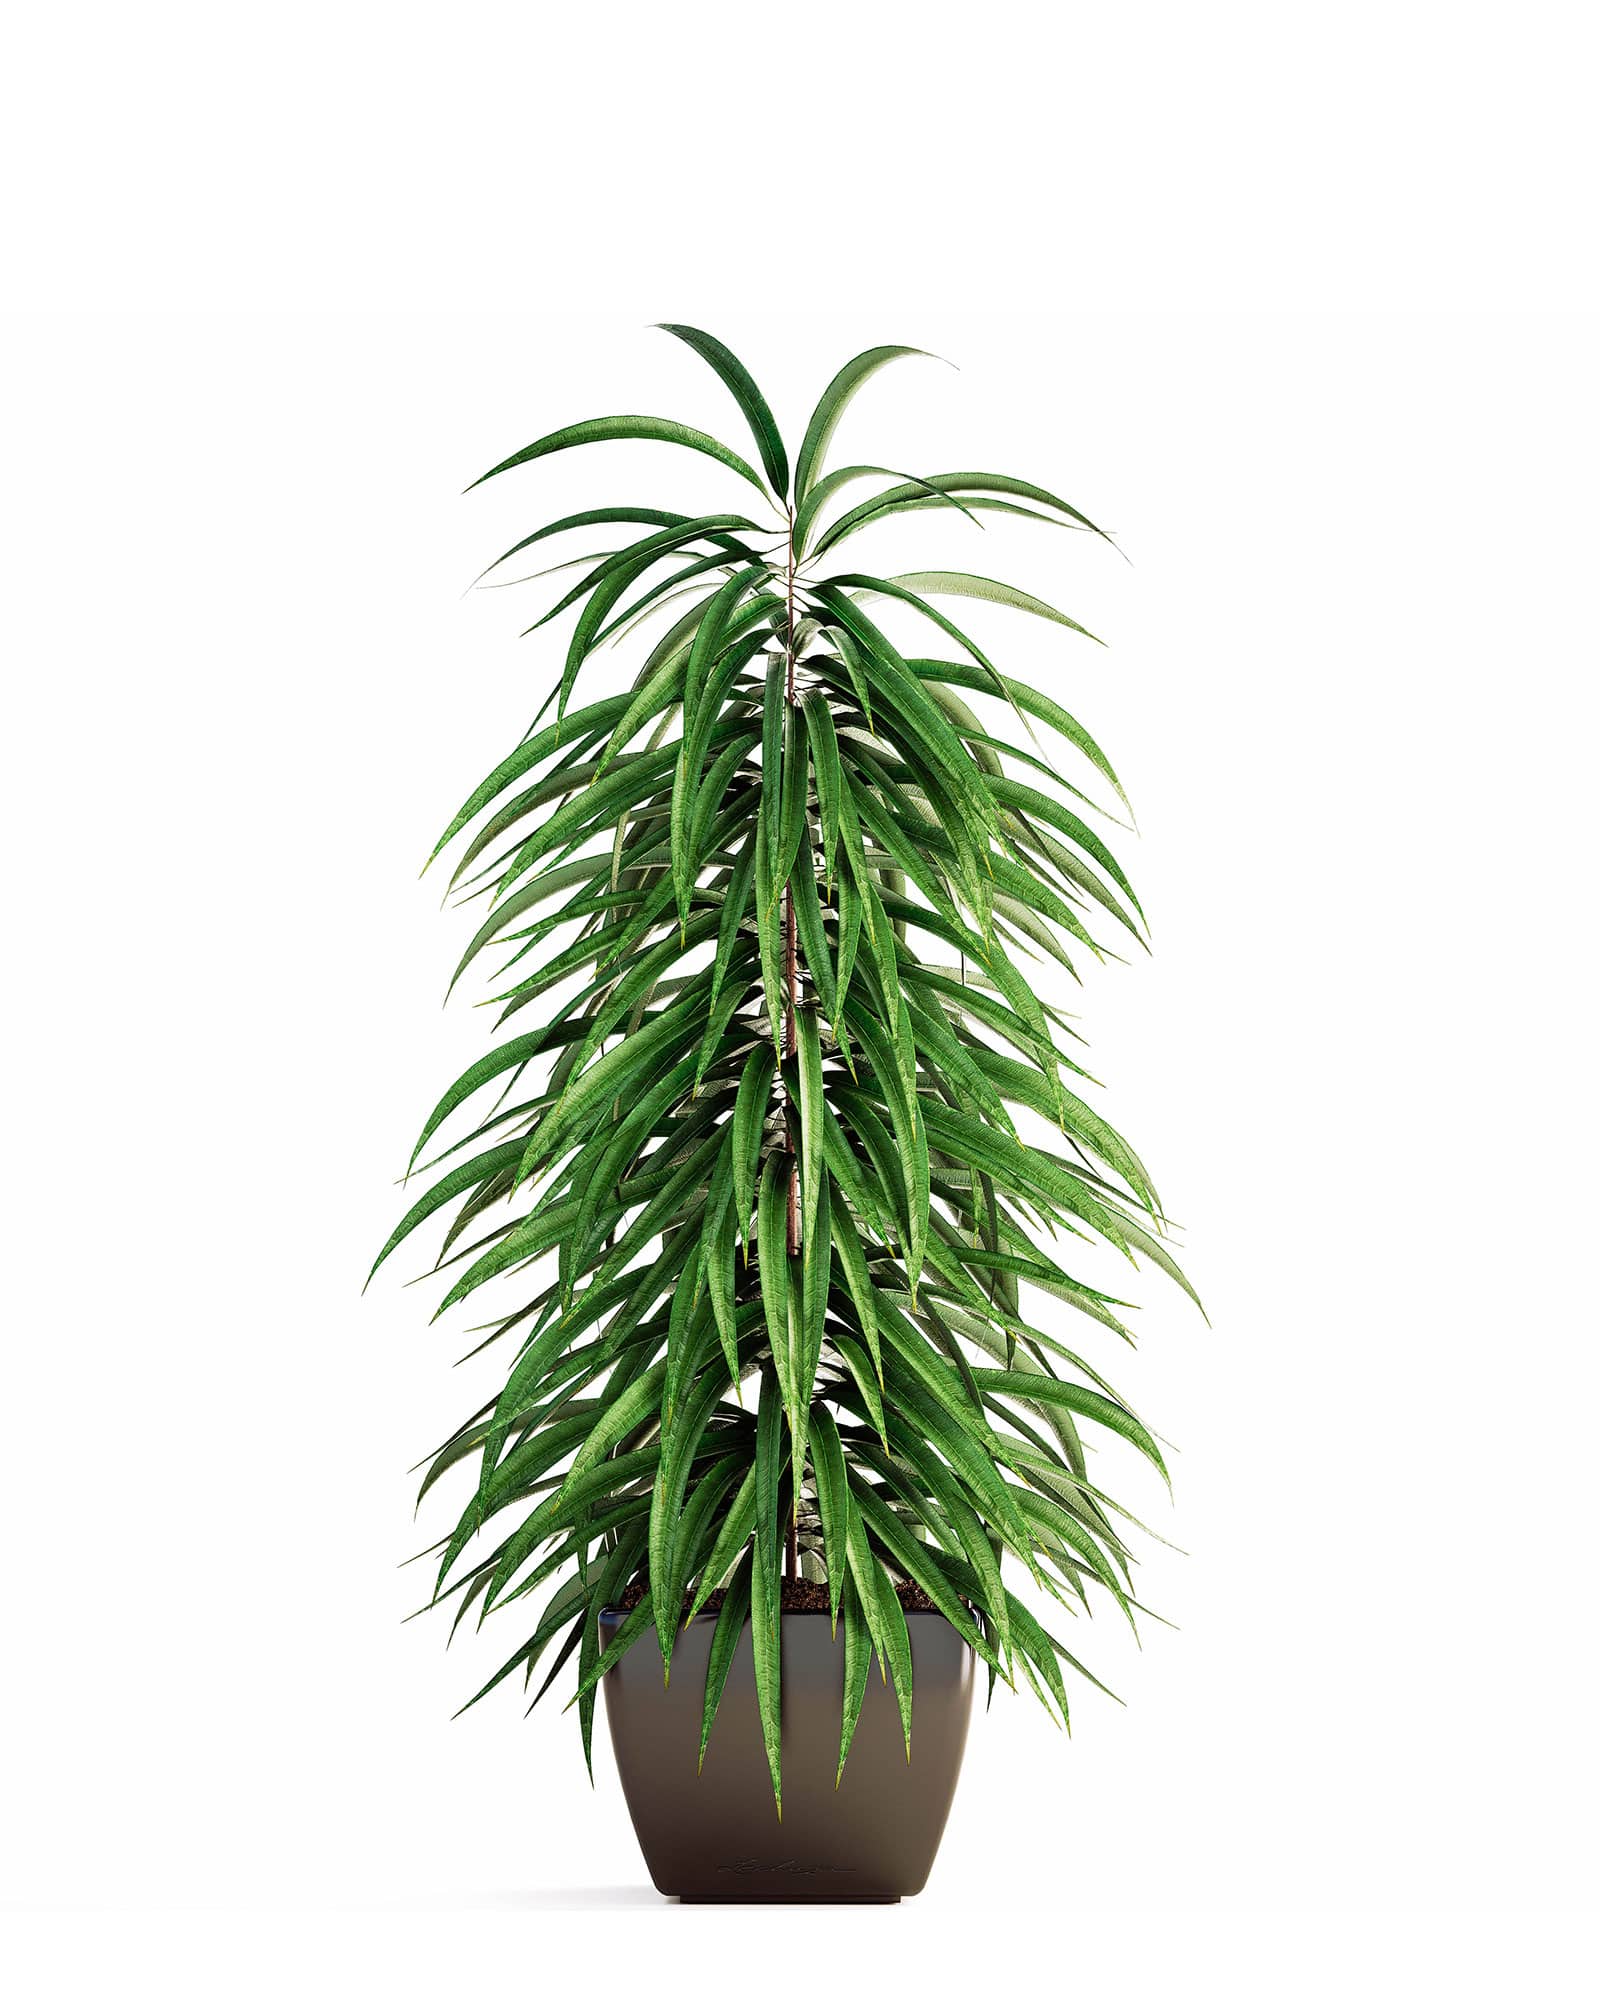 Isolated shot of a mid-sized Ficus alii houseplant in a modern black pot